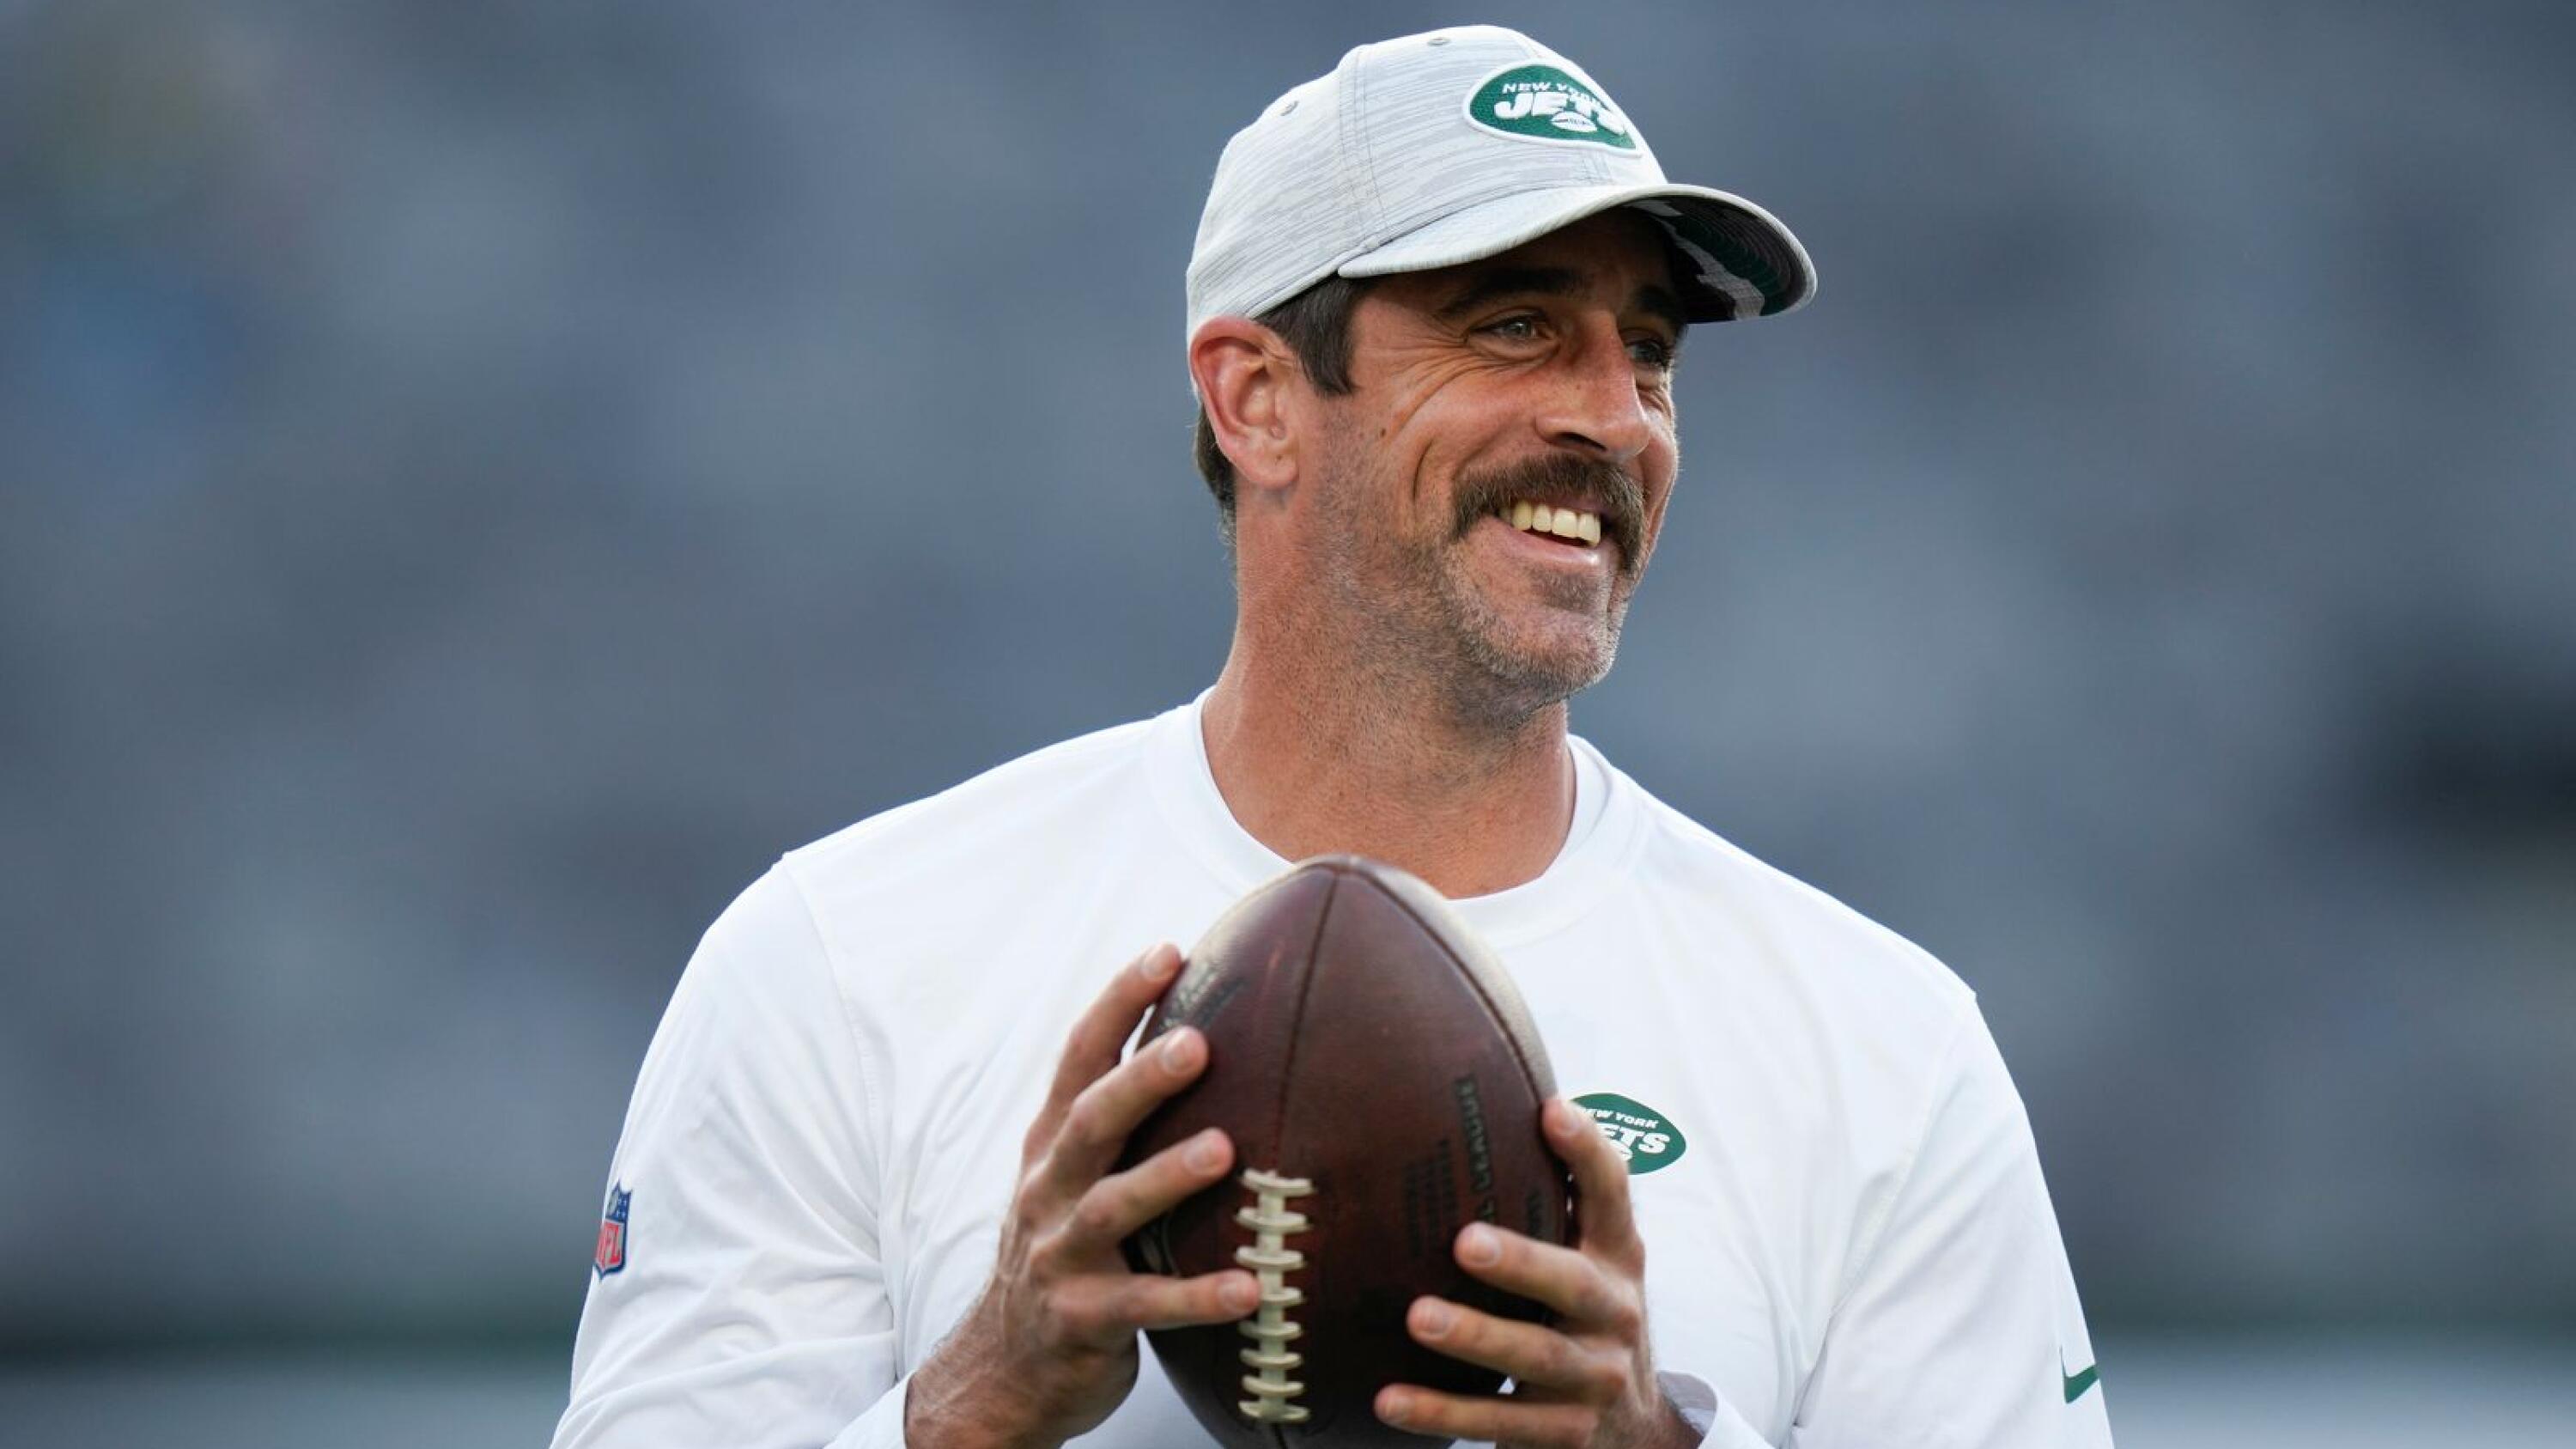 Aaron Rodgers aims to take Jets higher than they've been in a long time